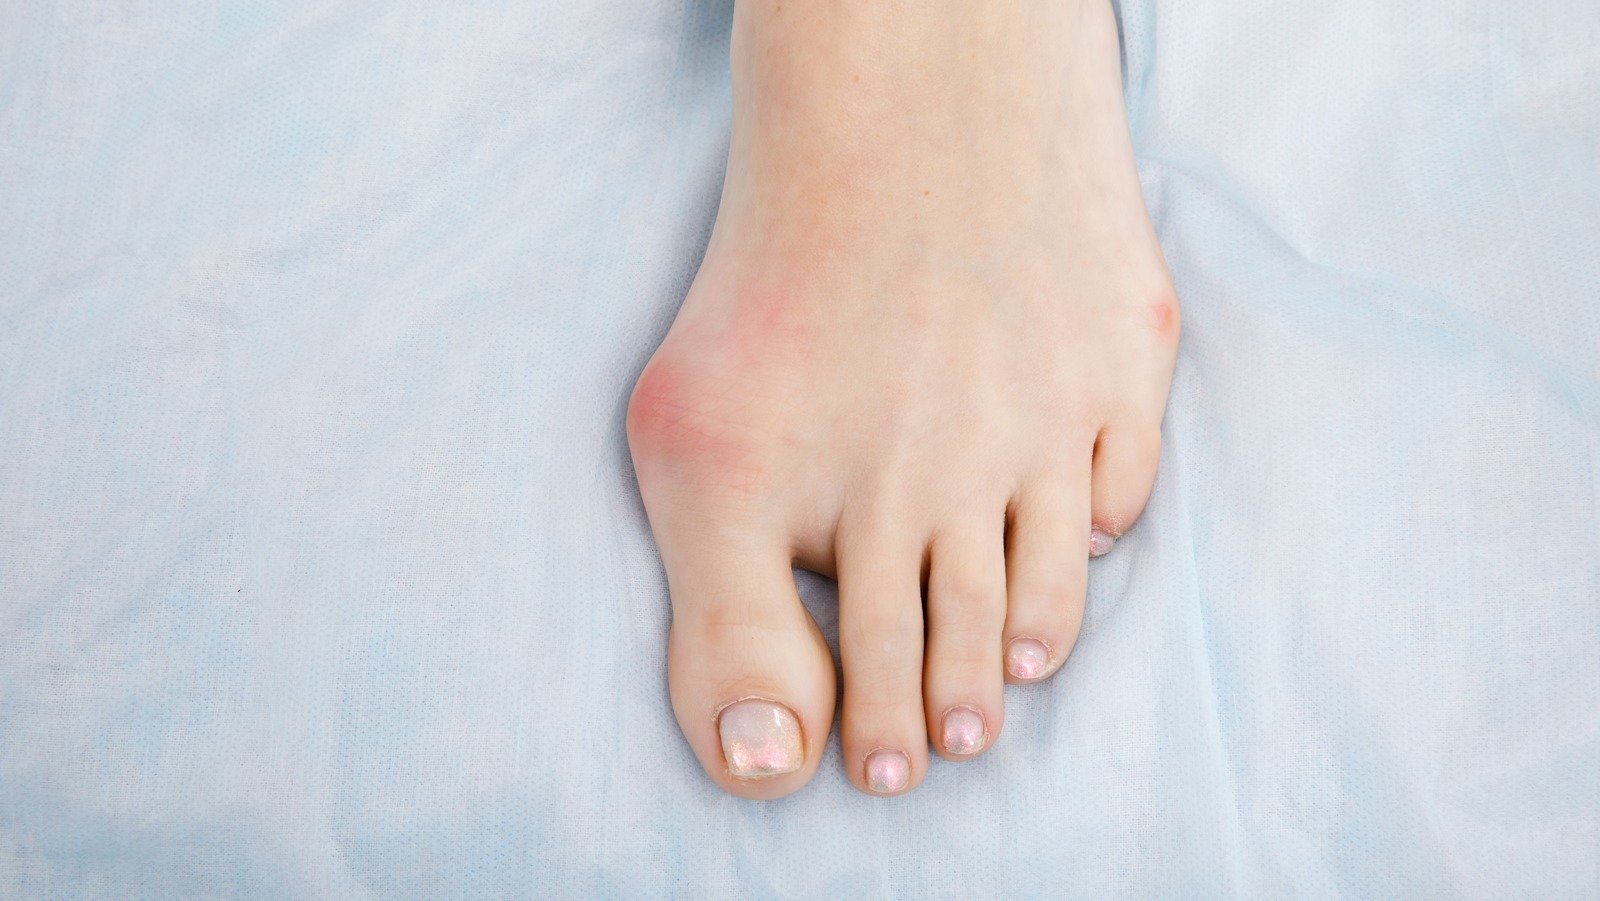 Ways To Treat Bunions At Home So You Don't Need Surgery 